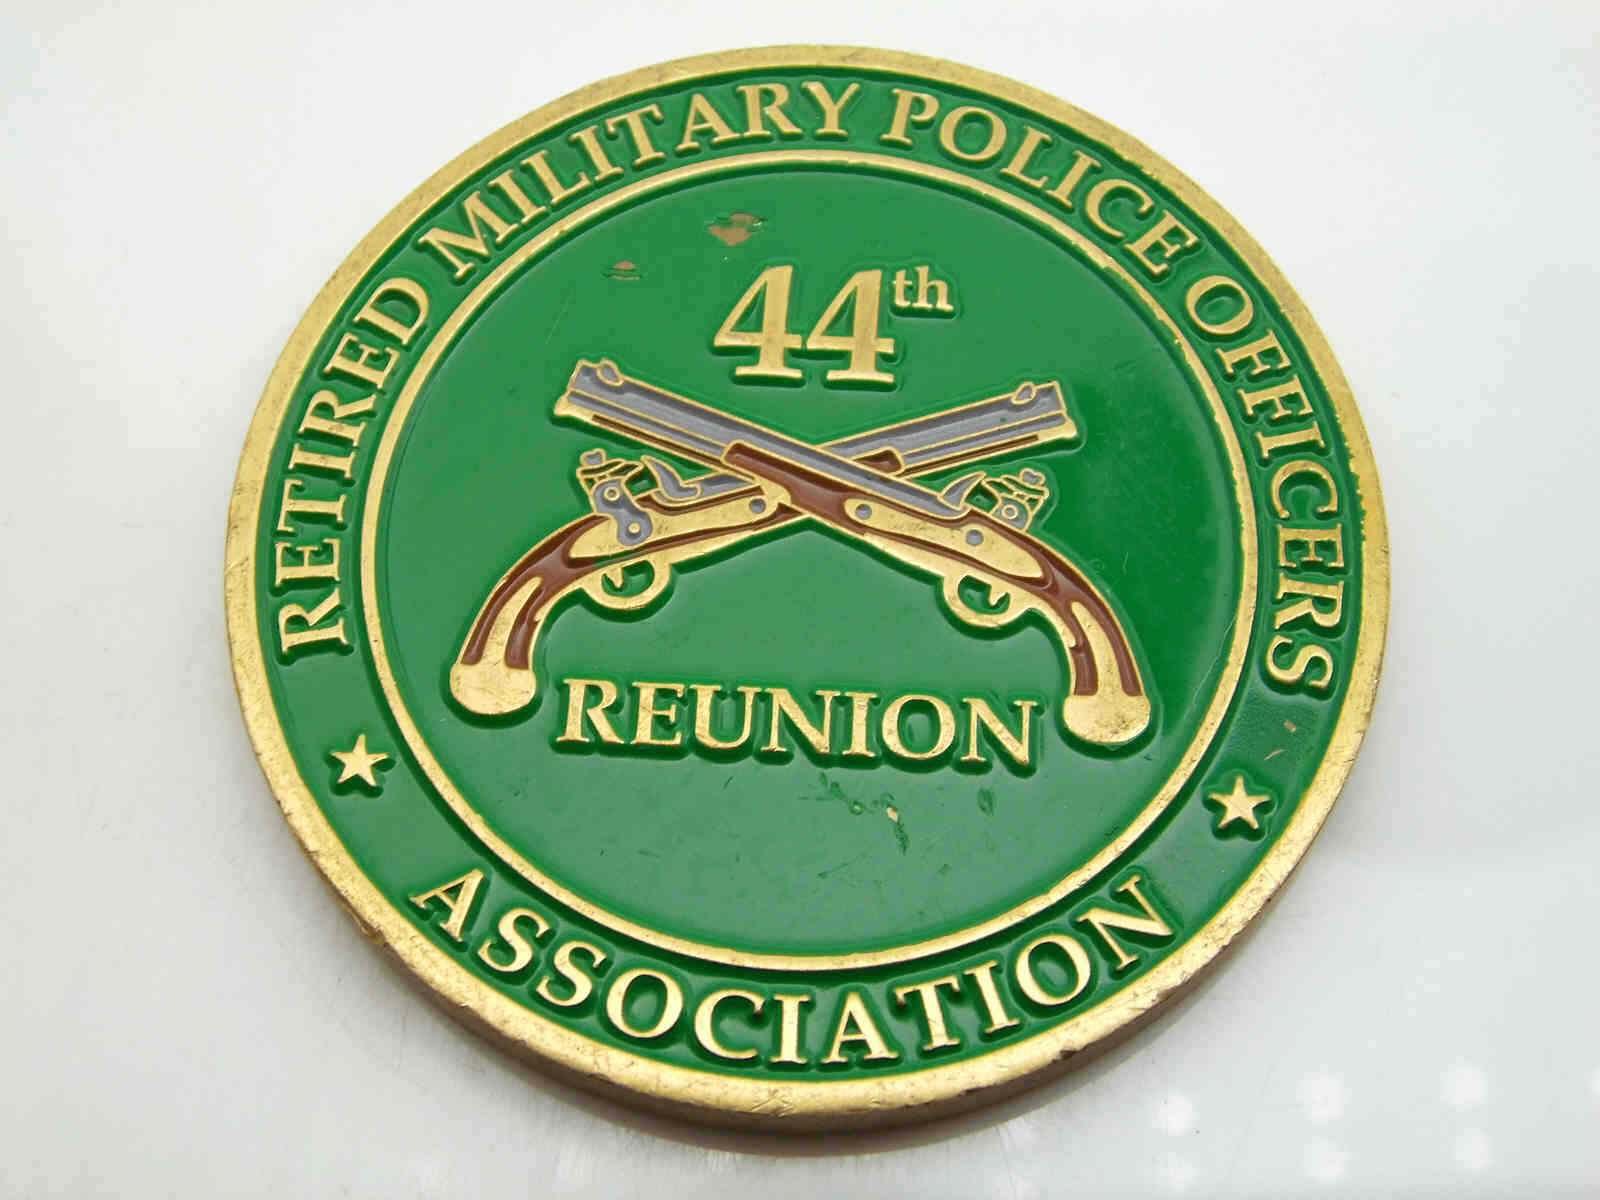 44TH REUNION RETIRED MILITARY POLICE OFFICERS ASSOCIATION CHALLENGE COIN